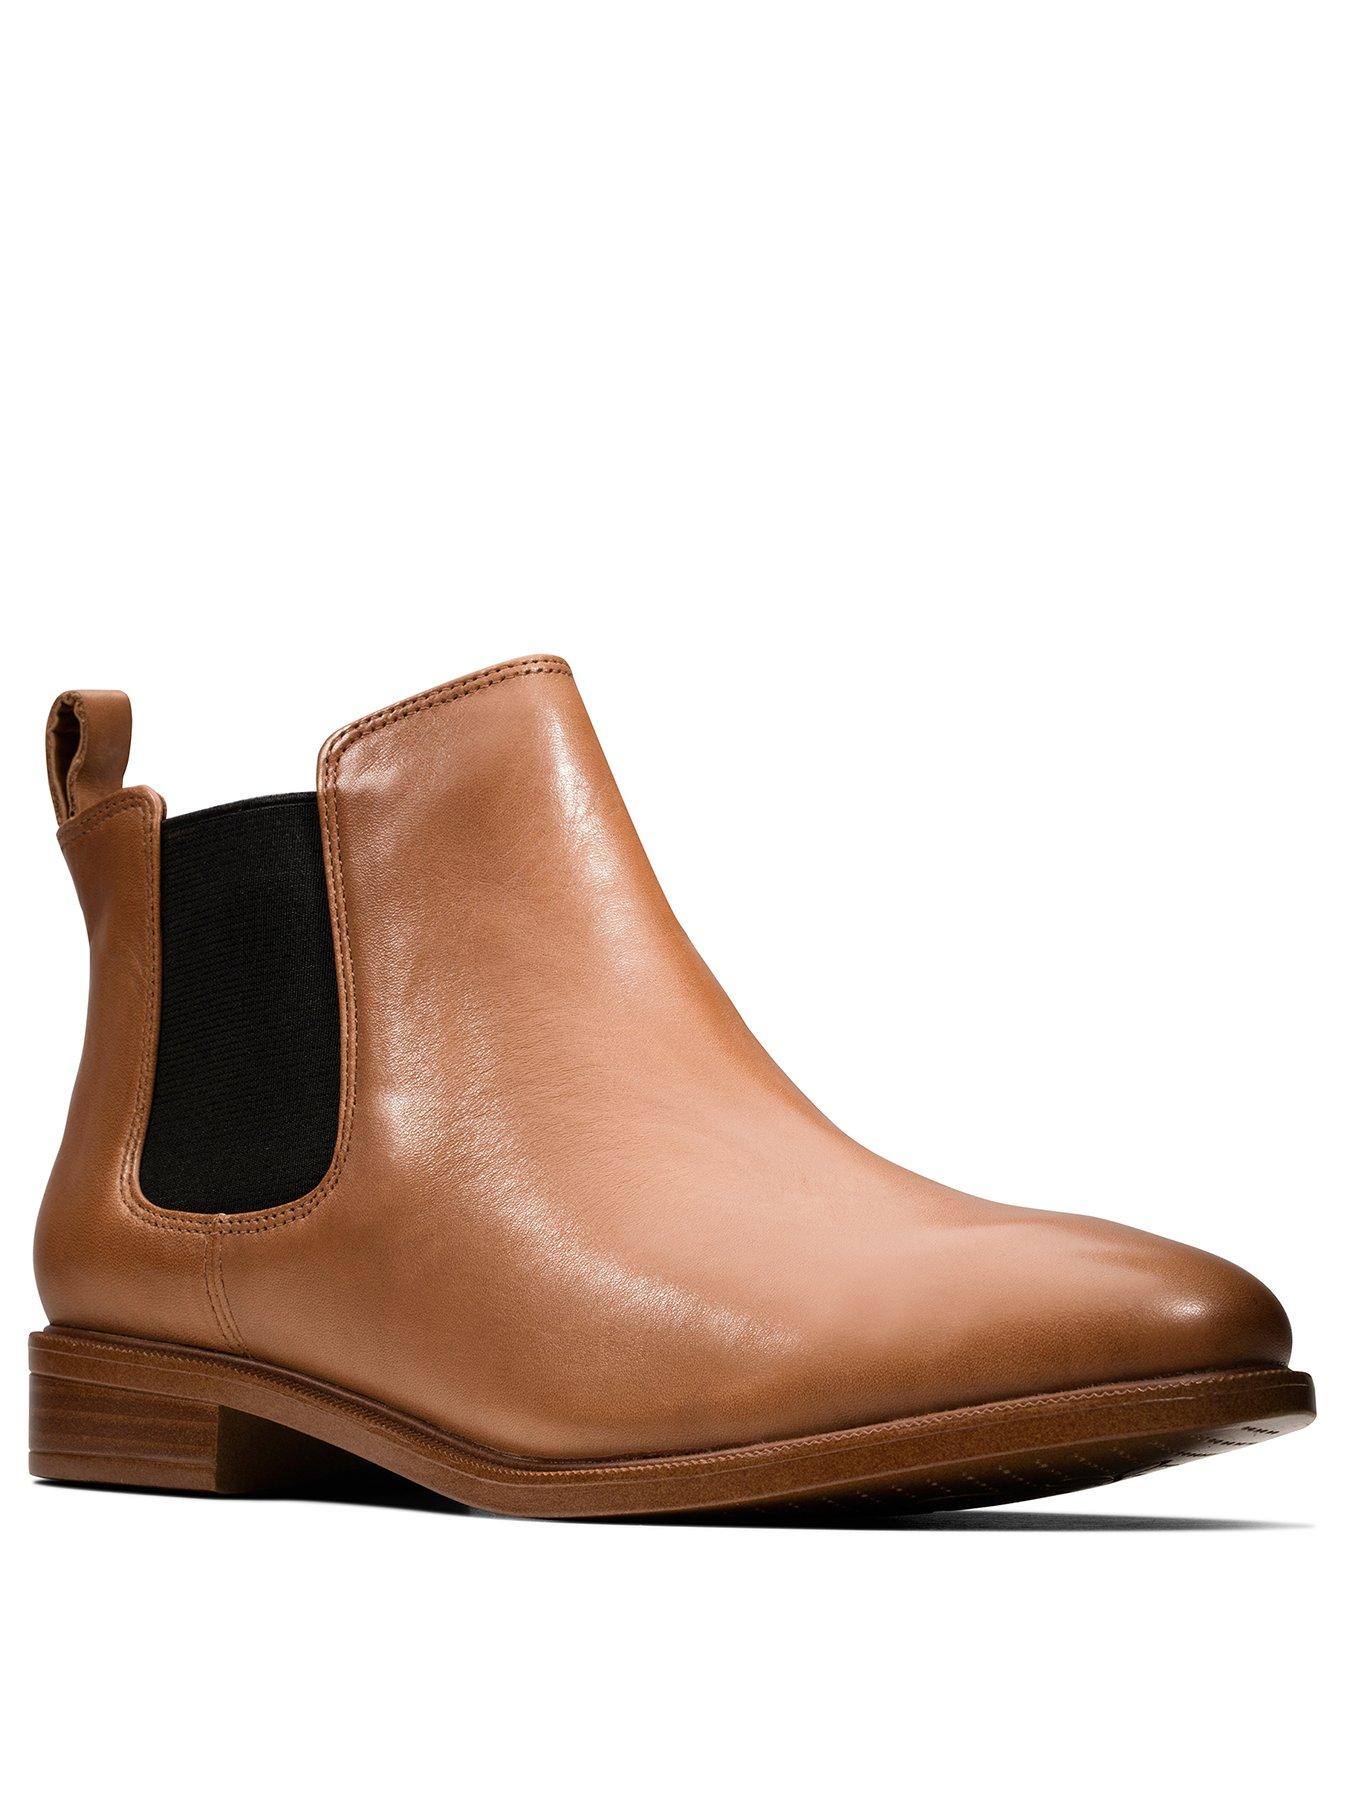 clarks ankle boots on sale